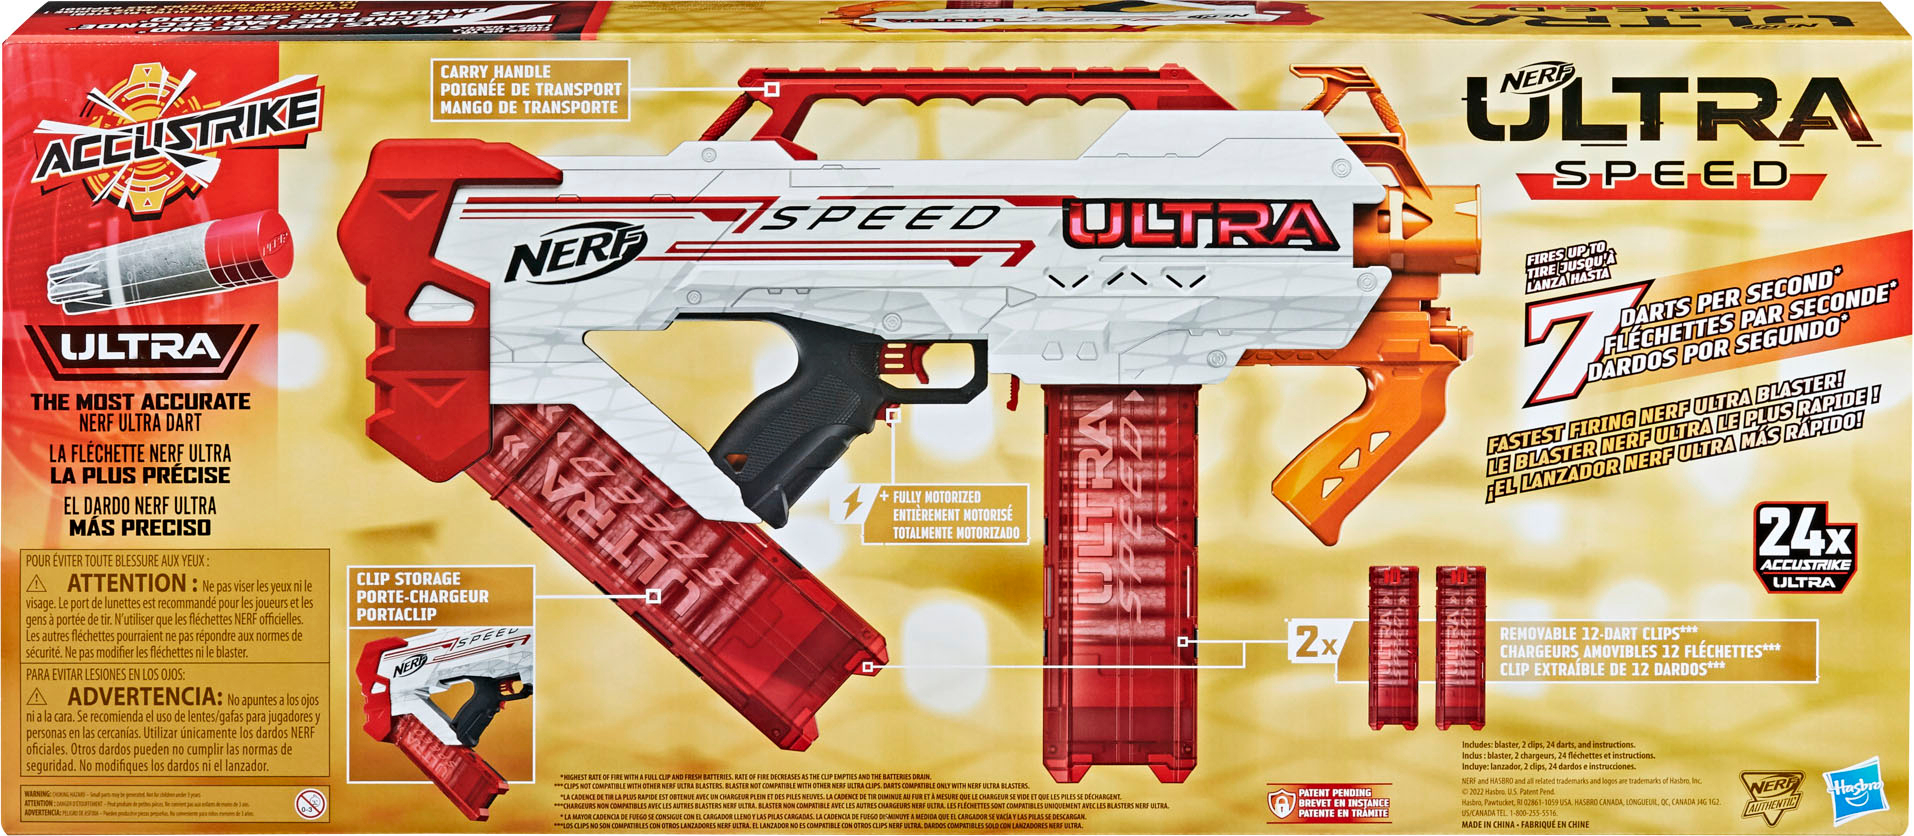 Is it just me or is the Nerf Ultra Speed really cheap for such a blaster?  It's been years since I last purchased a Nerf blaster, and I'm feeling a  nostalgic itch